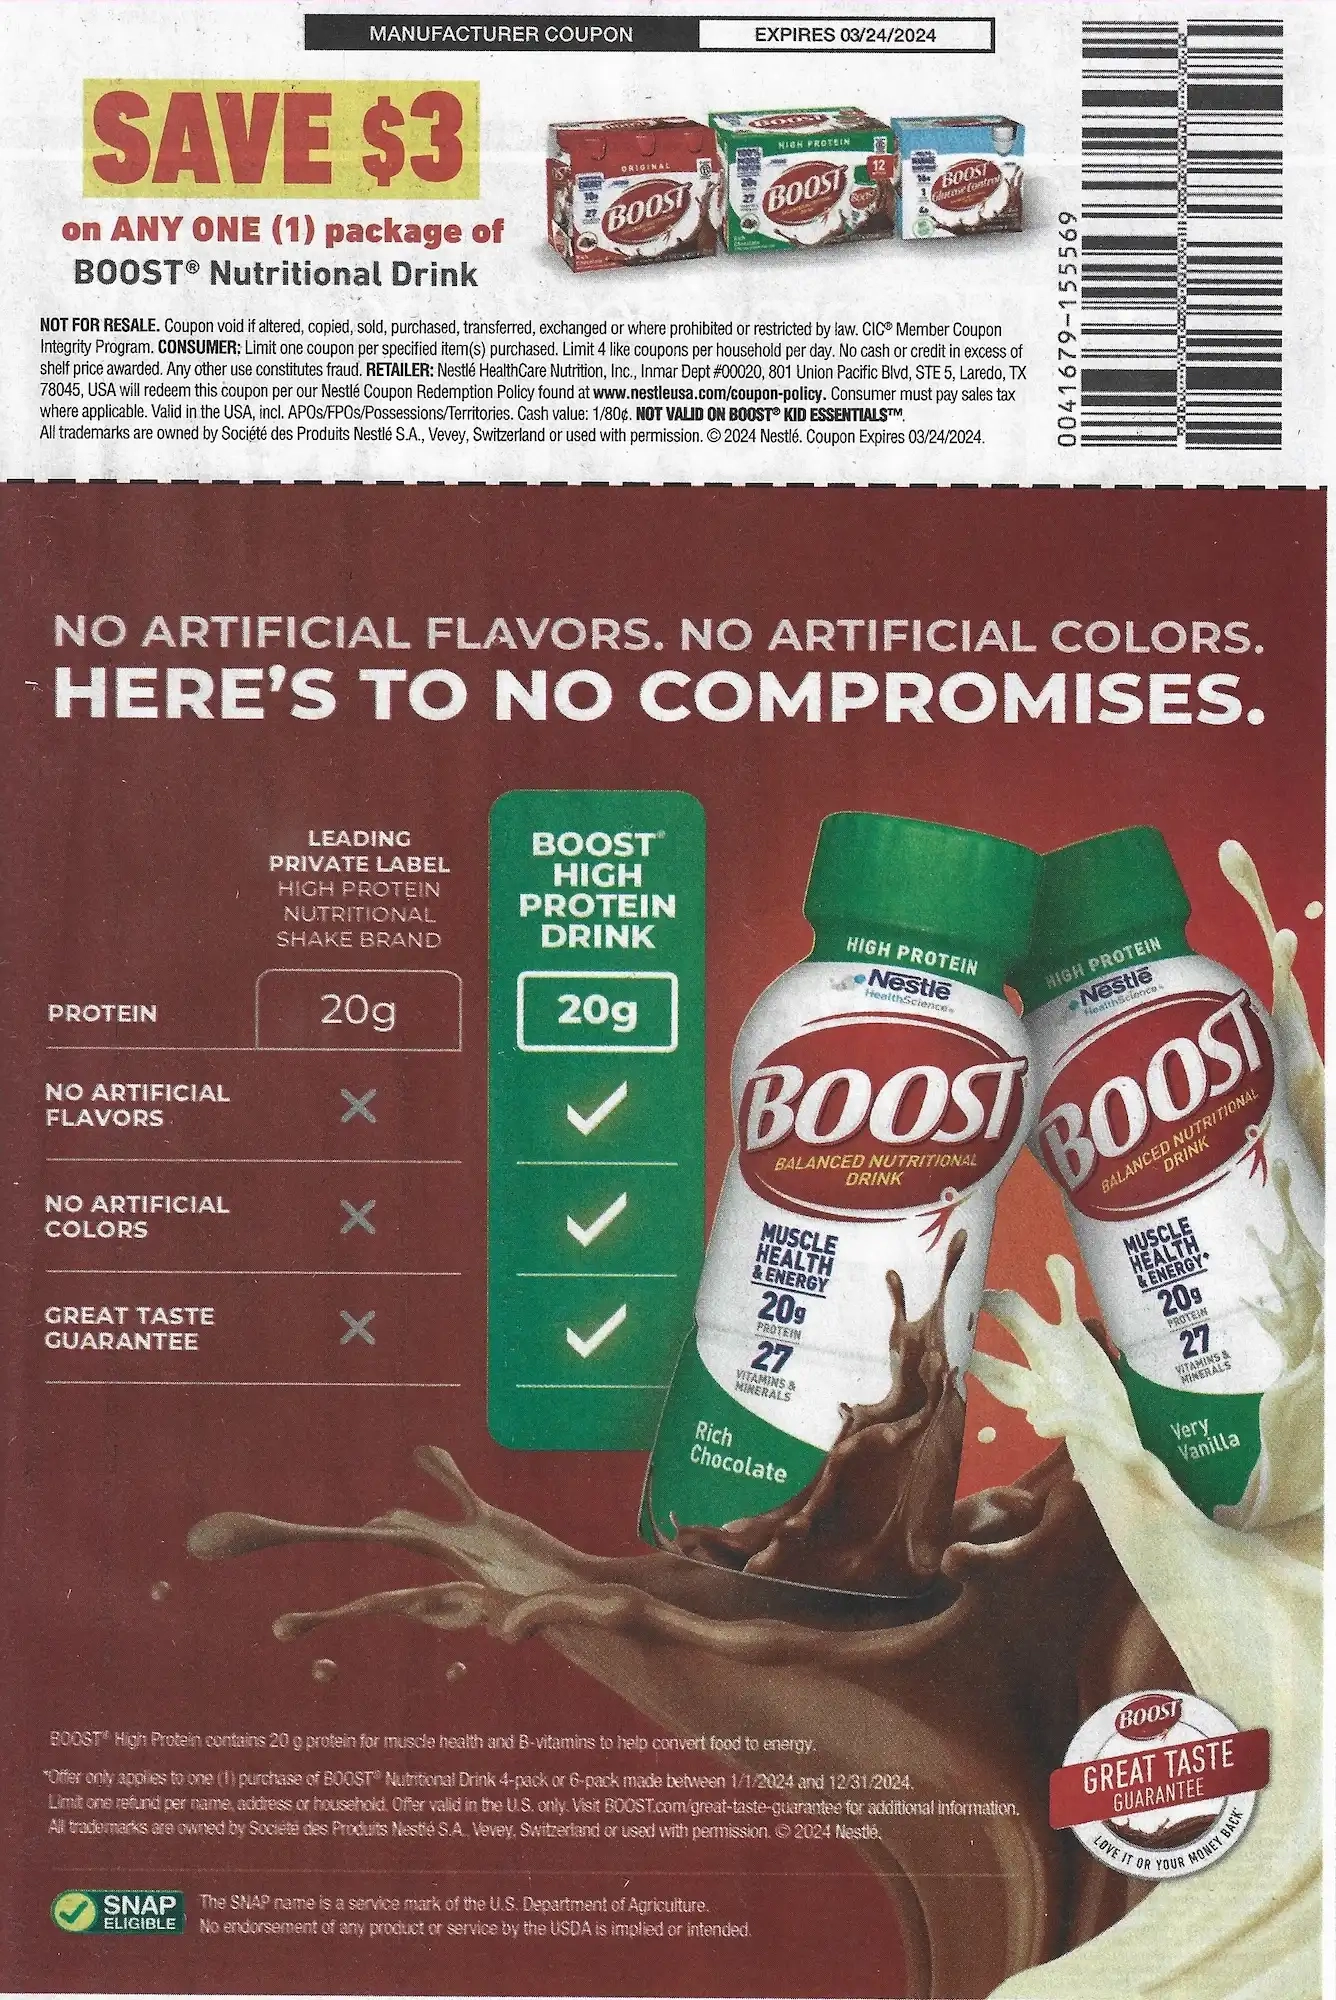 Save.Com Weekly Mailer Coupons - 02/24/2024 Boost